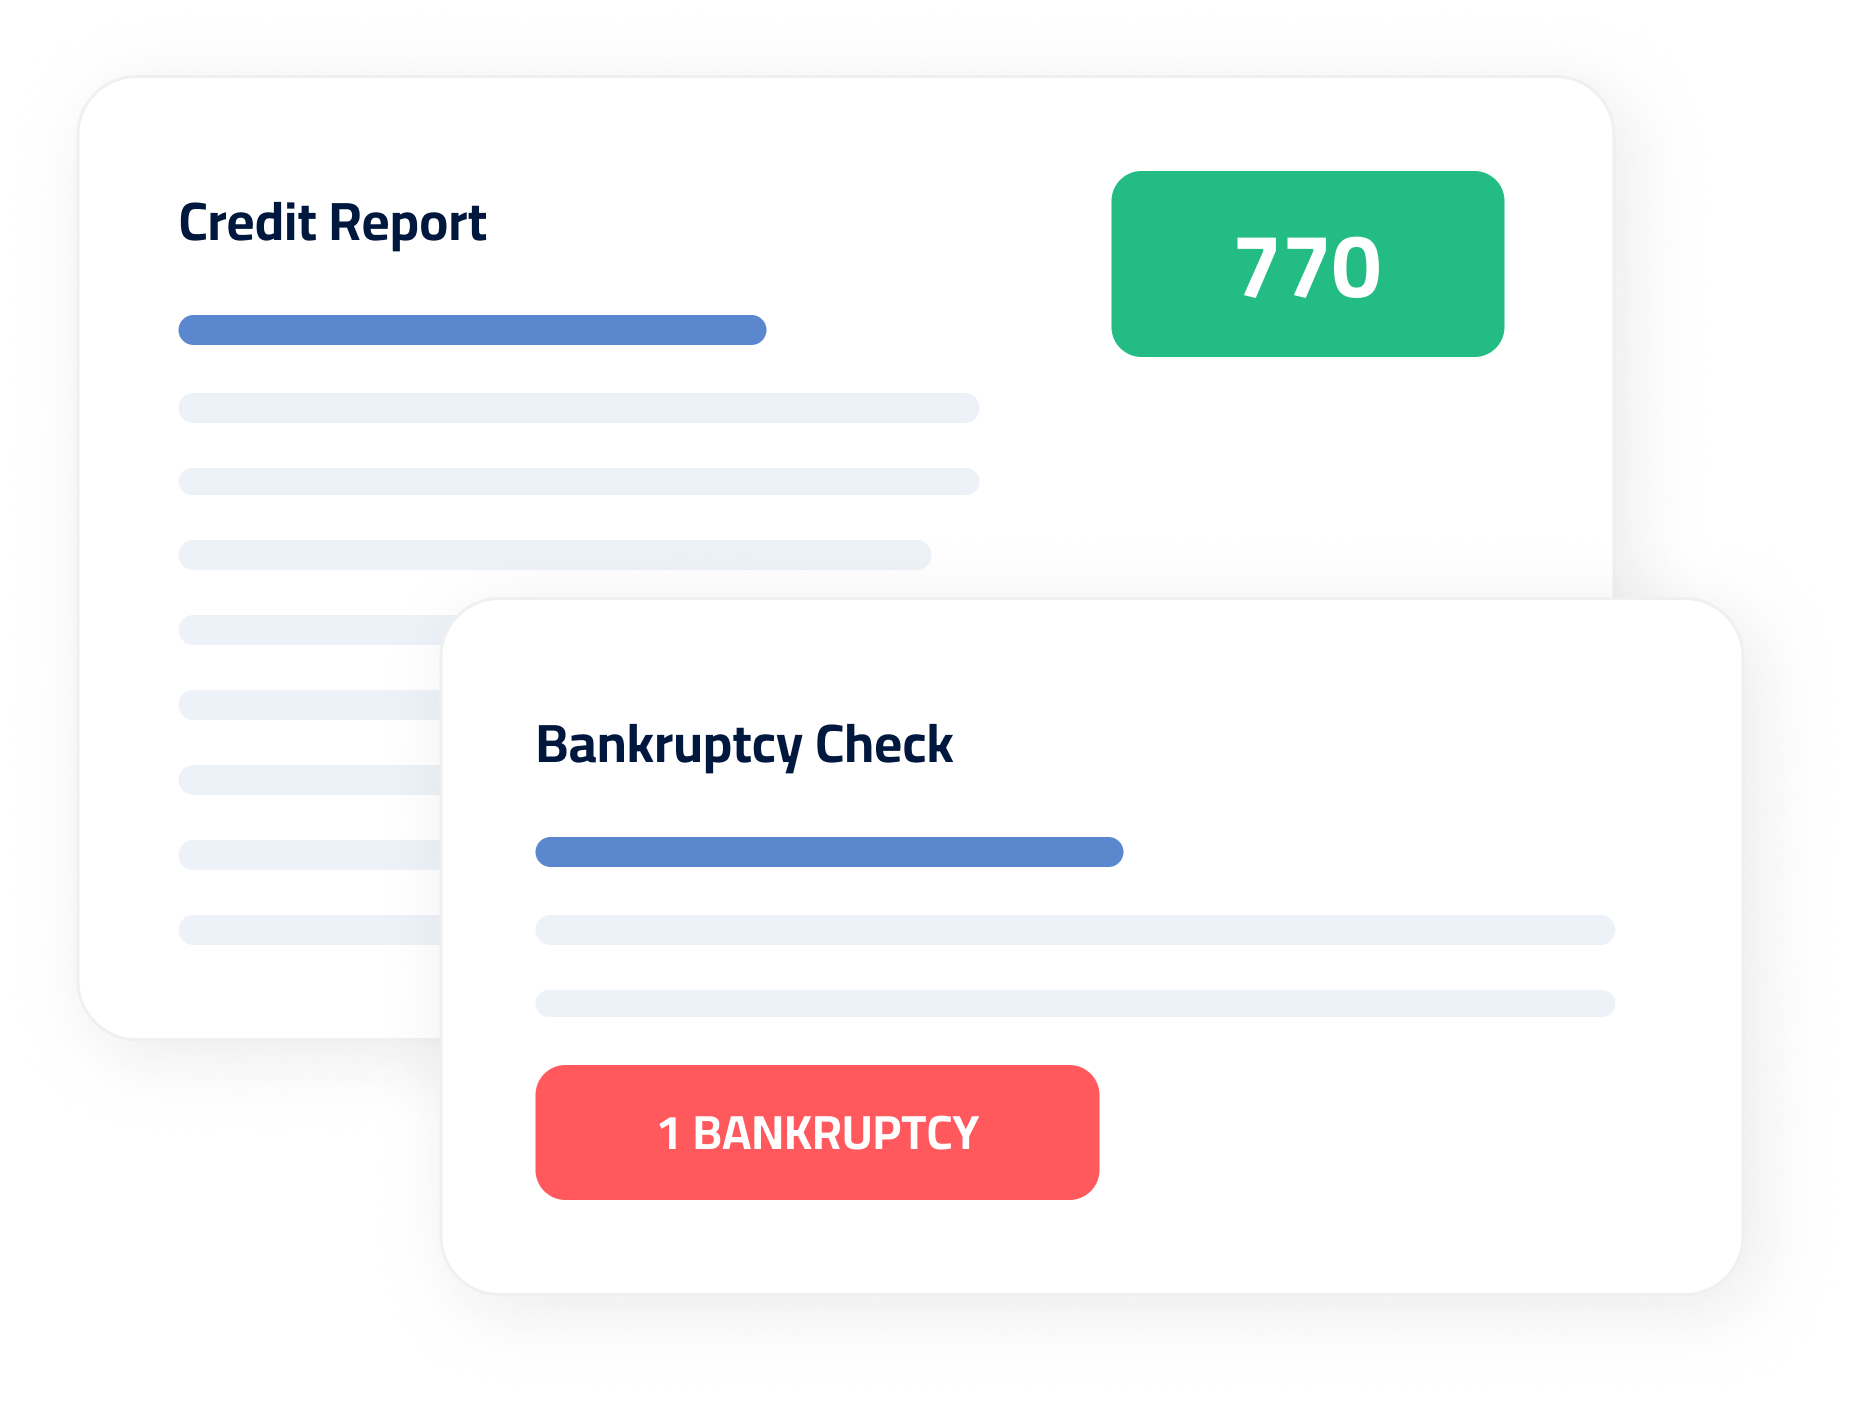 Wireframe showing a credit report and bankruptcy report